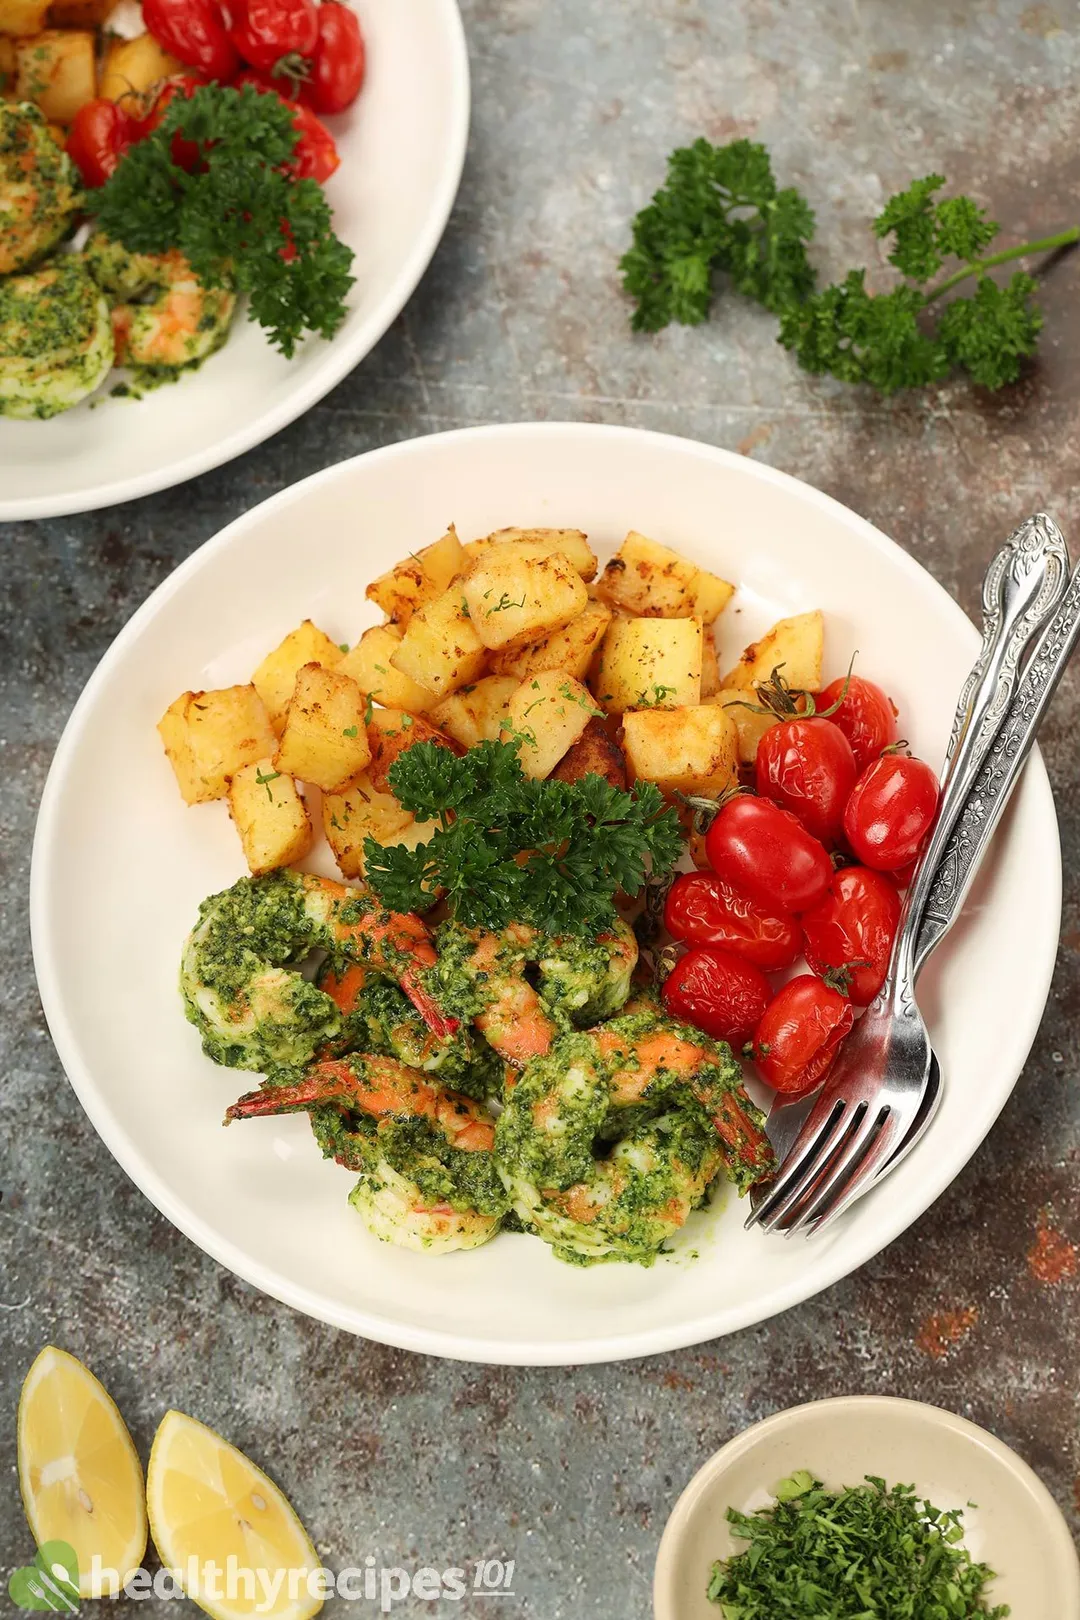 How to Store and Reheat the Leftovers pesto shrimp